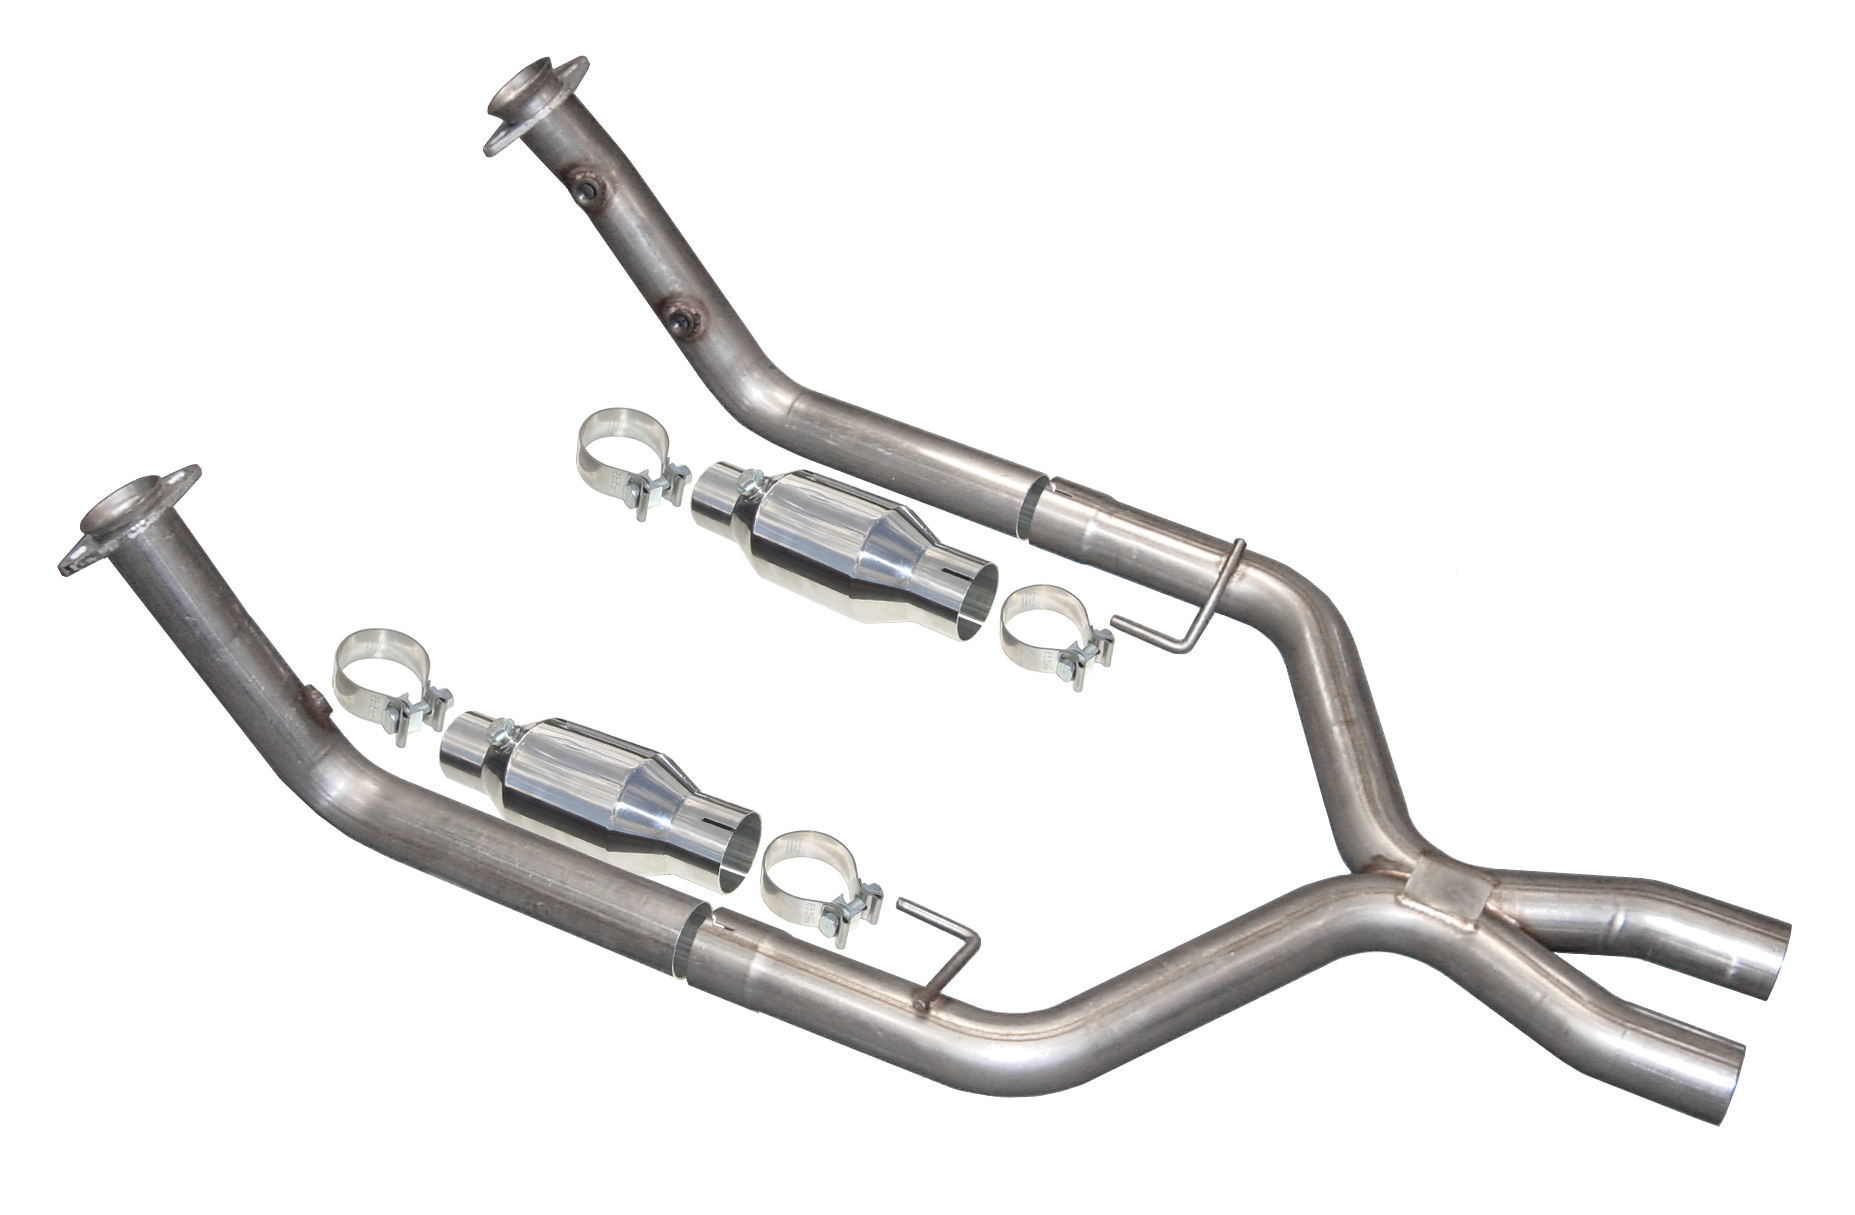 2005-2010 Mustang GT 4.6L 2.5" X-Pipe w/ Metallic Cats (for Short Tube Header) - By PYPES